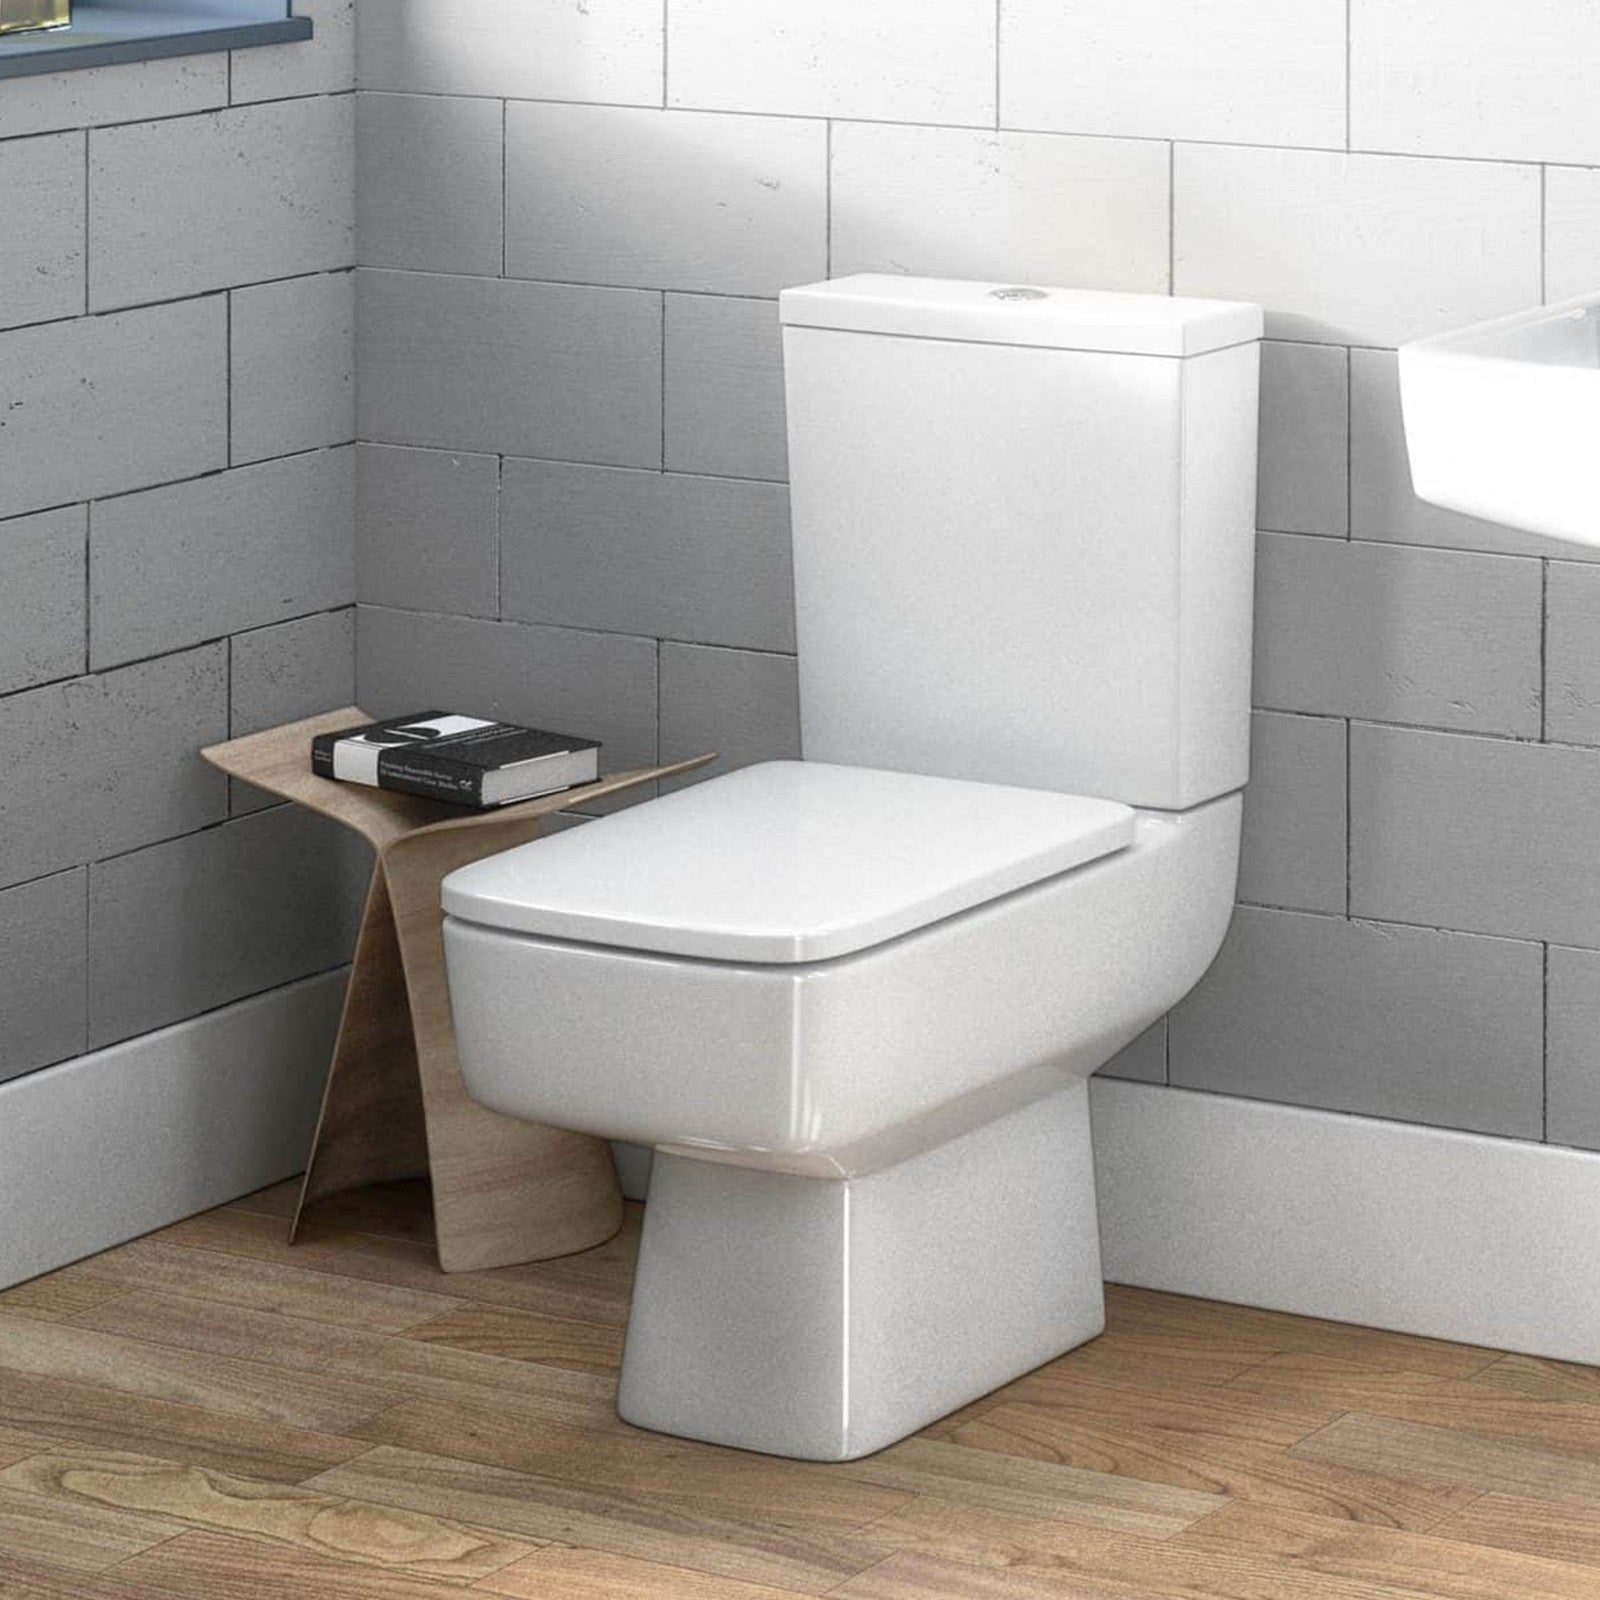 Nuie Legend Modern Square Close Coupled Toilet Bathroom WC Pan, Toilet Seat & Cistern